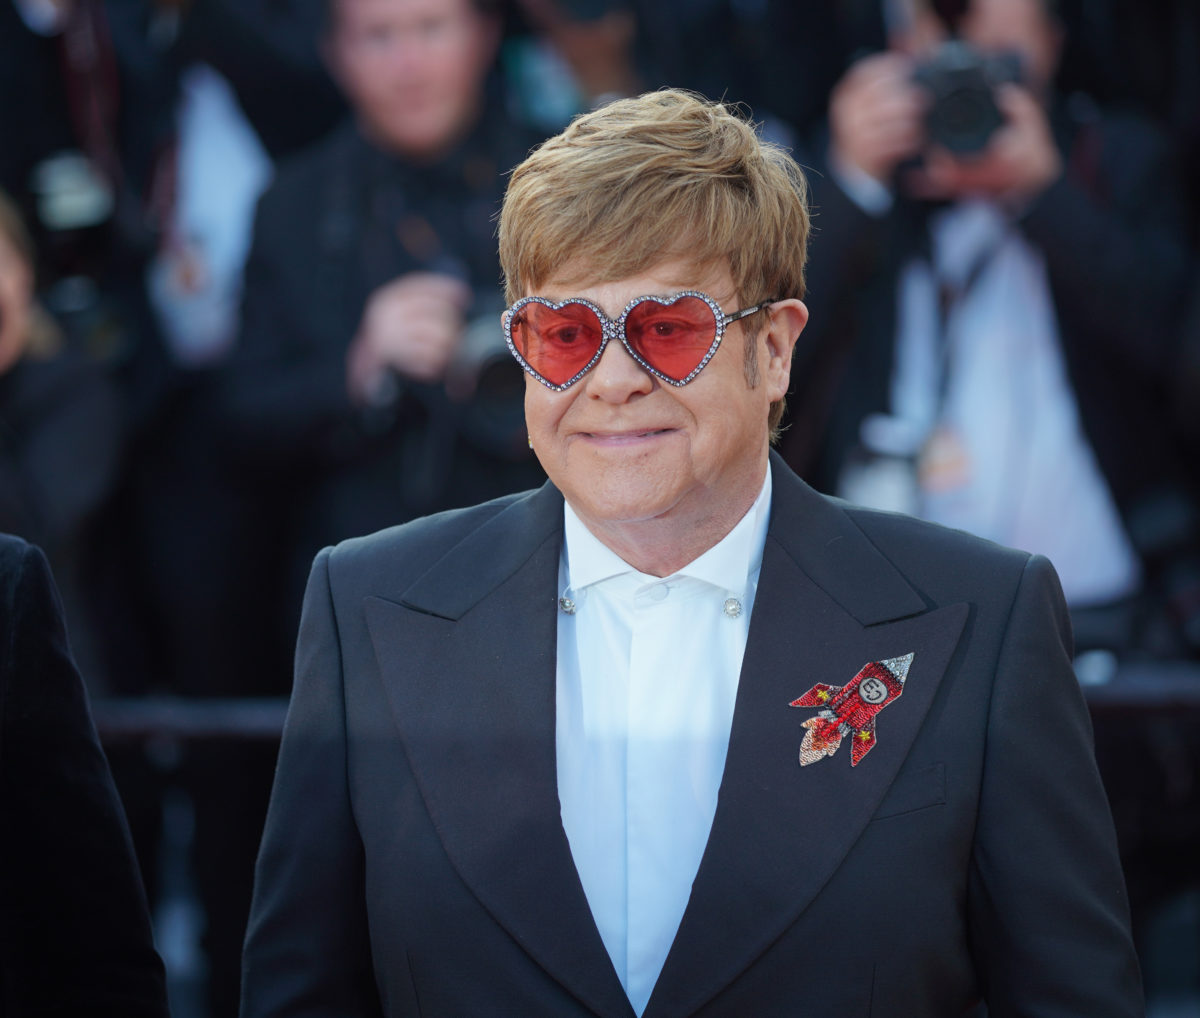 Sir Elton John, 76, Hospitalized After Suffering a Fall | Retirement has gotten off to a rocky start for Elton John. Reports are offering an update on Sir John Elton after he was rushed to the hospital last night.